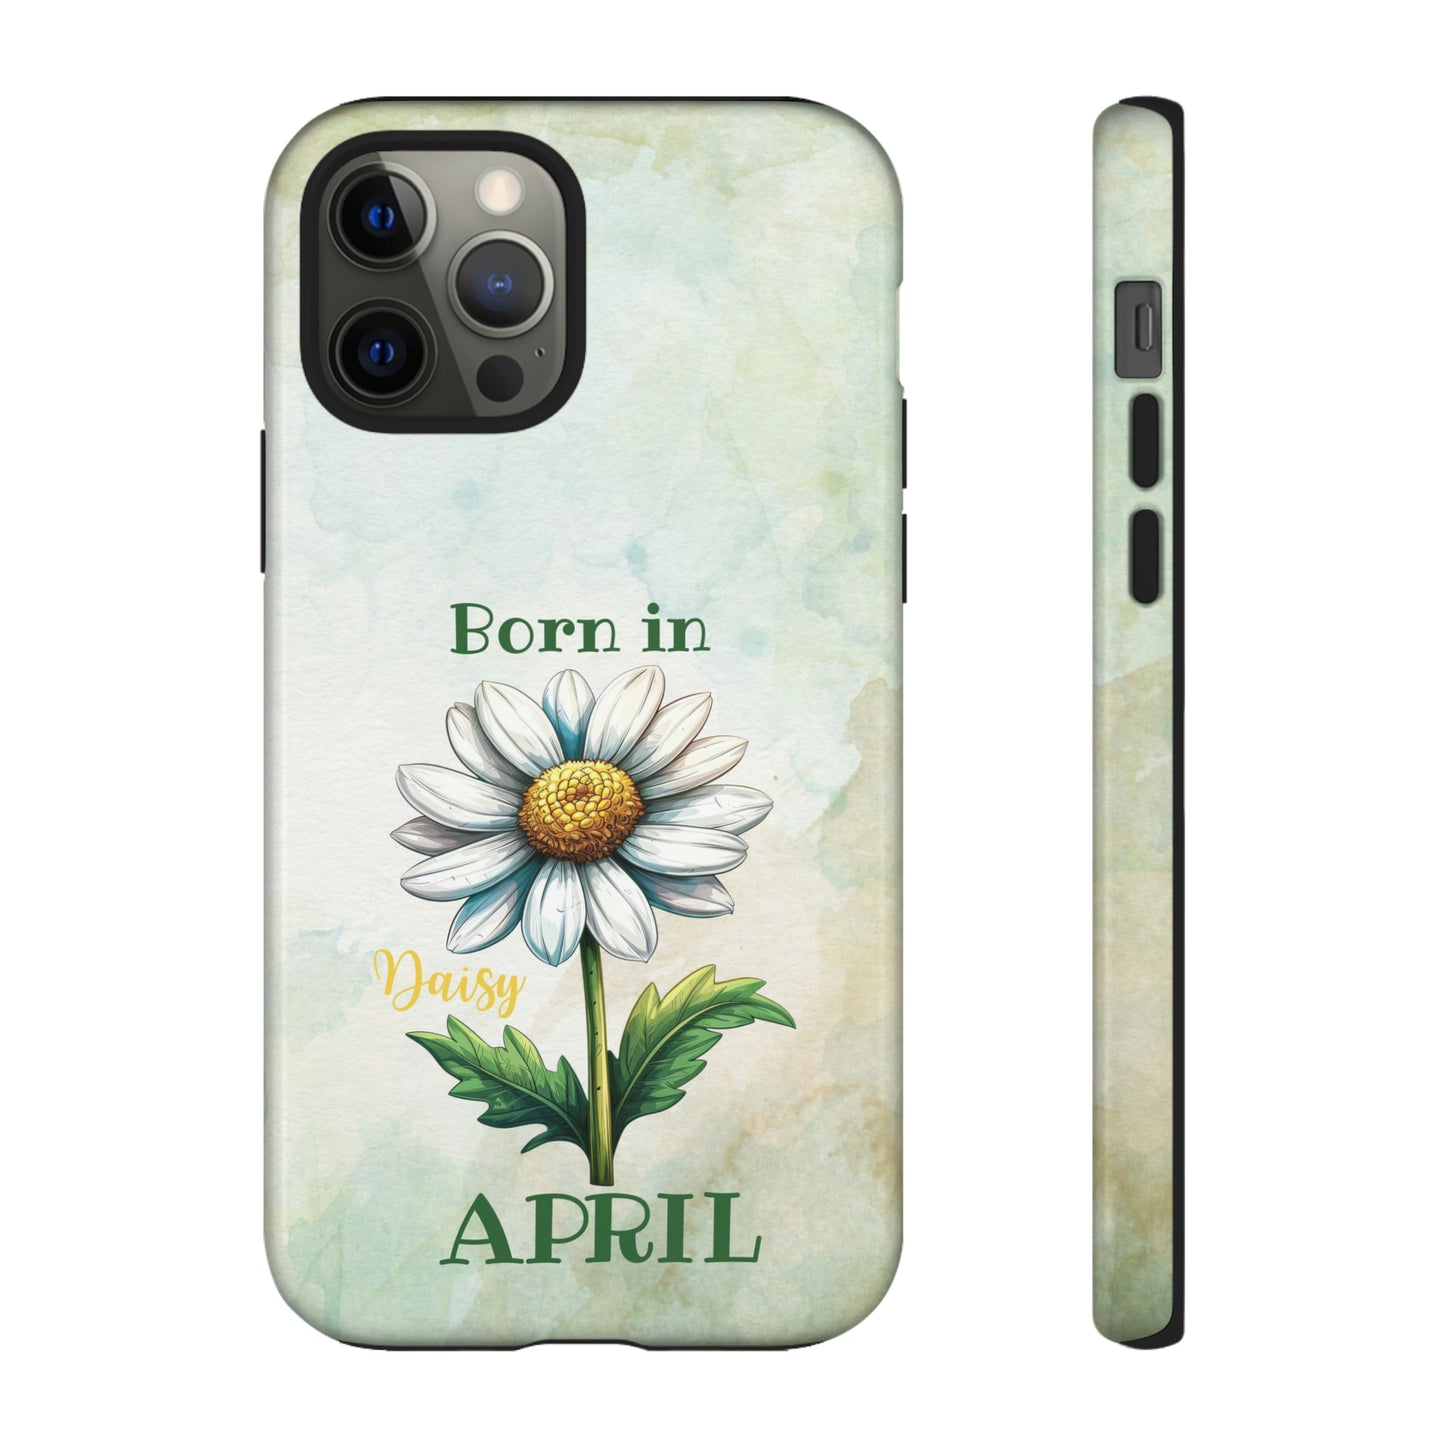 Born in April IPhone Cases, April Birthday, Daisy Flower IPhone Case